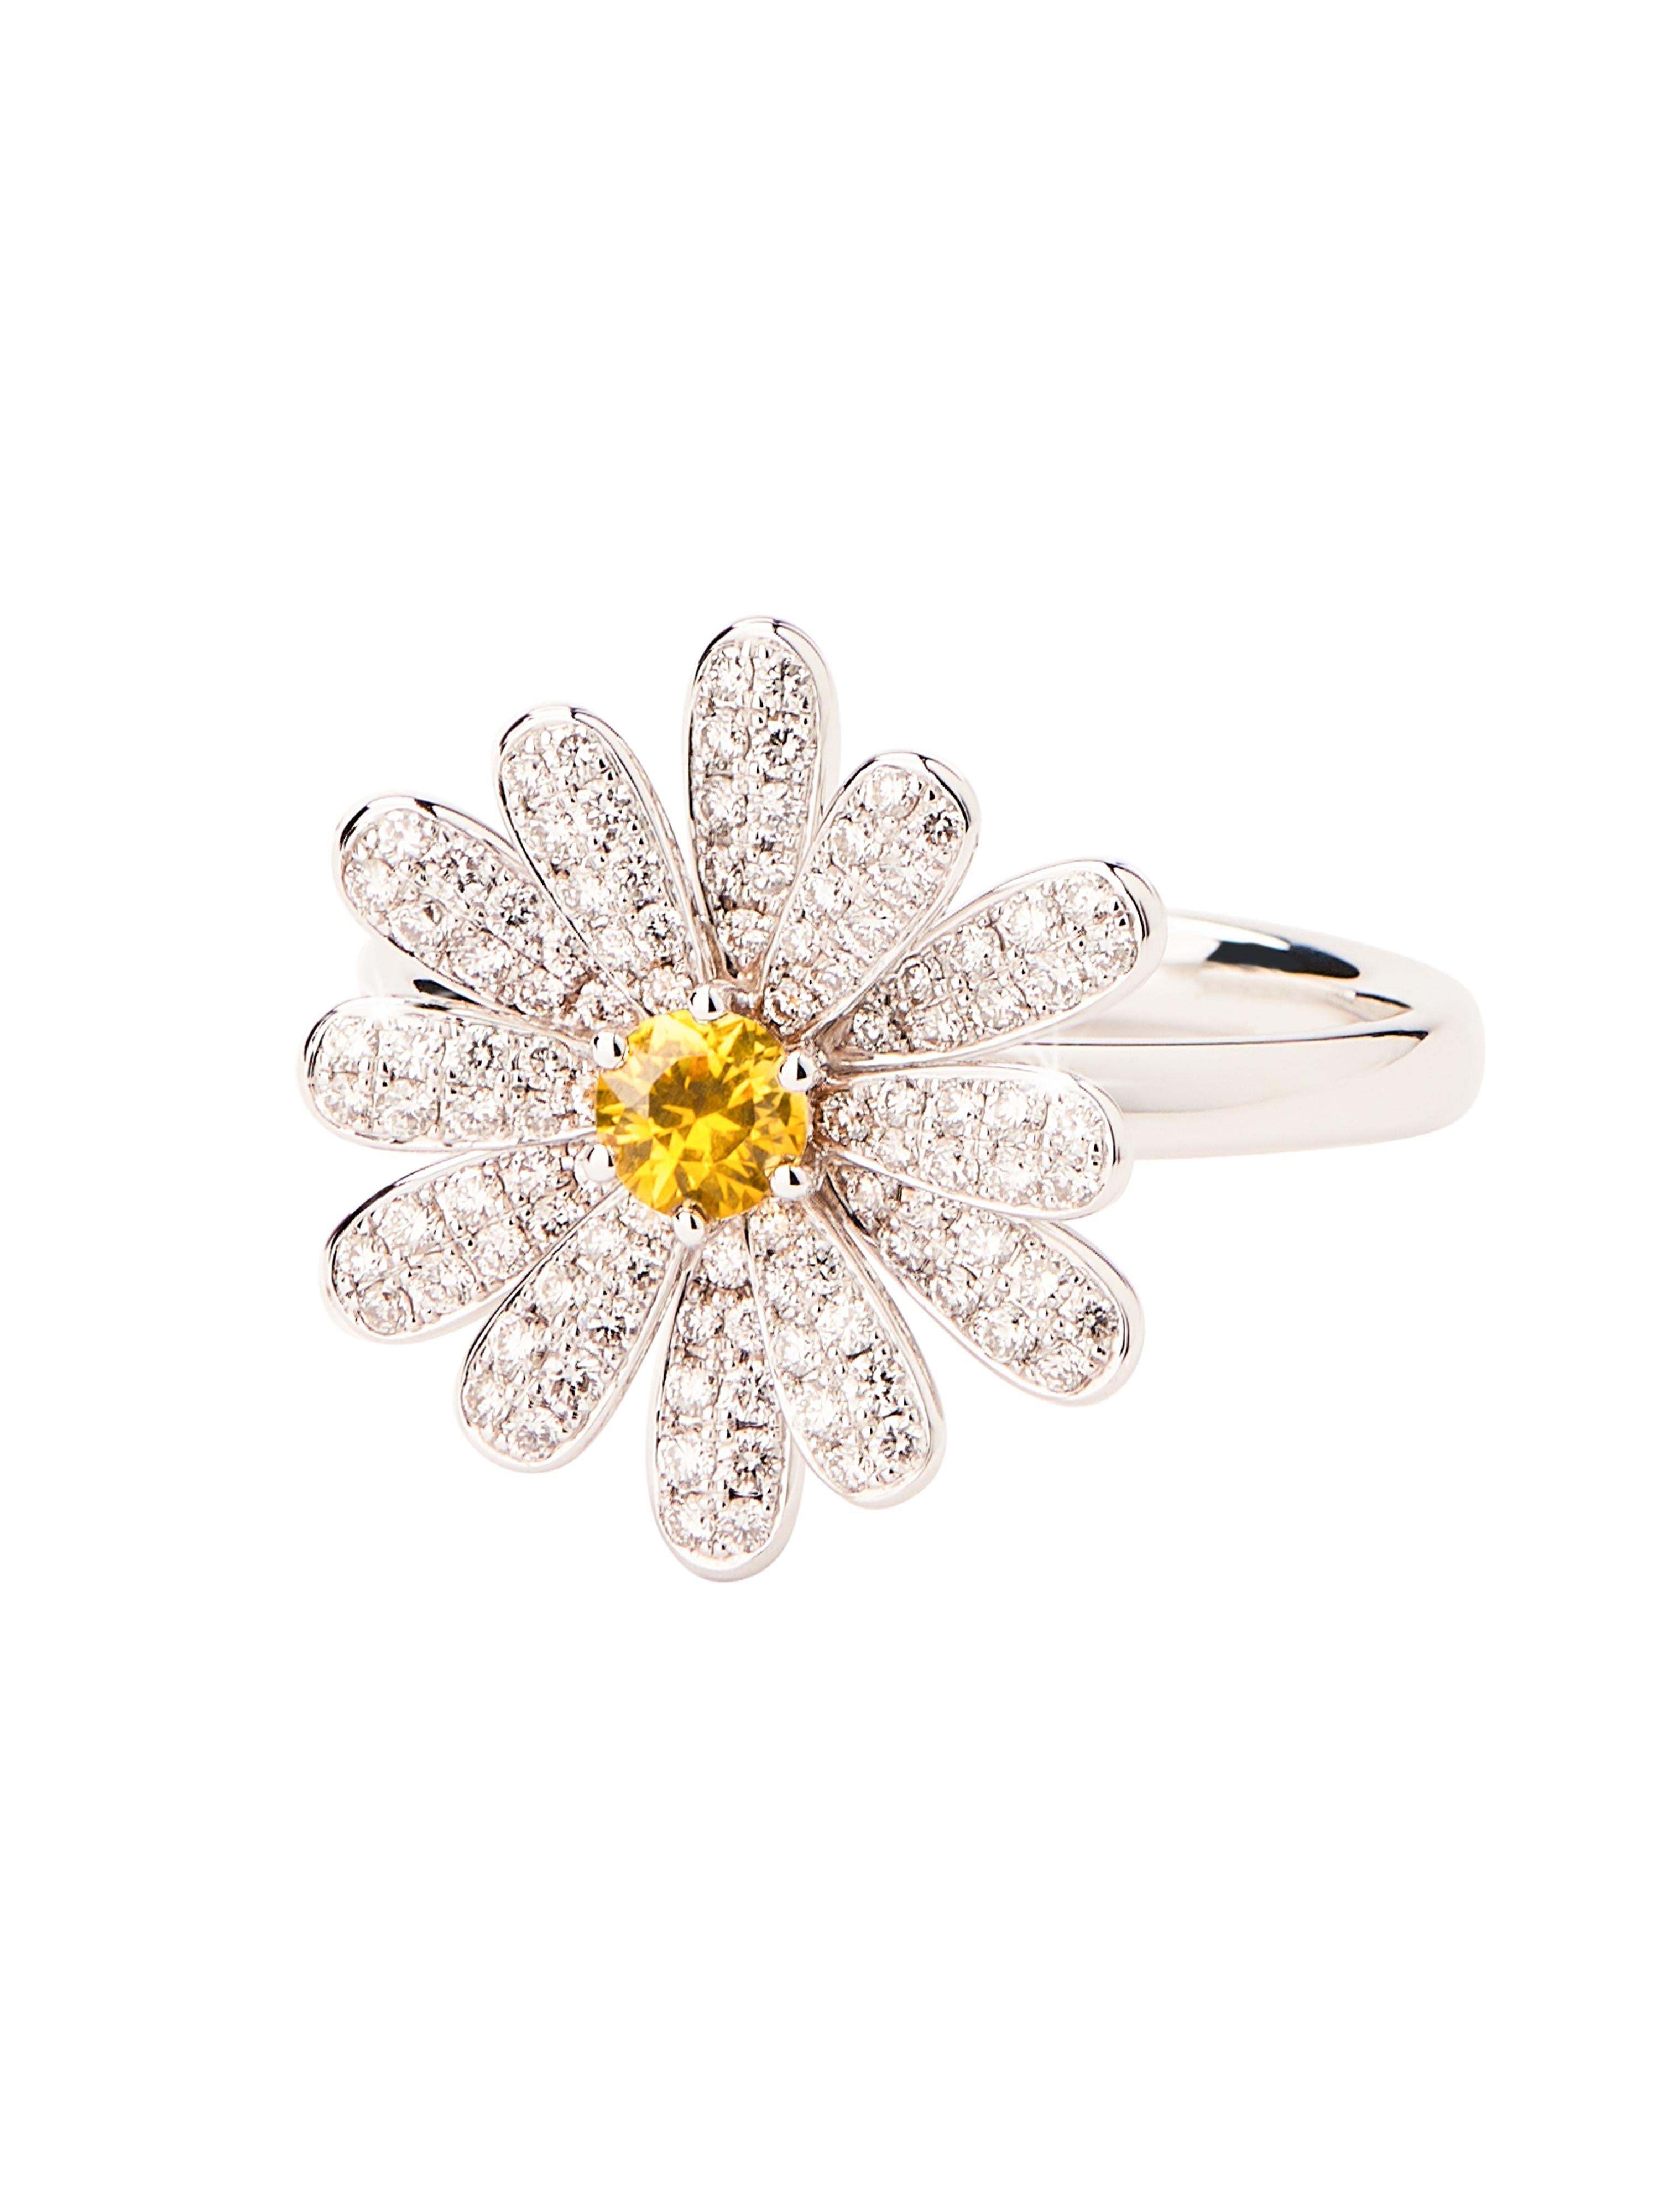 The Flower Poiray collection reflects the elegance and purity of the jeweler's expertise with a diamond-paved version set with a yellow sapphire as well as two semi-paved versions available in yellow or white gold.

This ring is available in